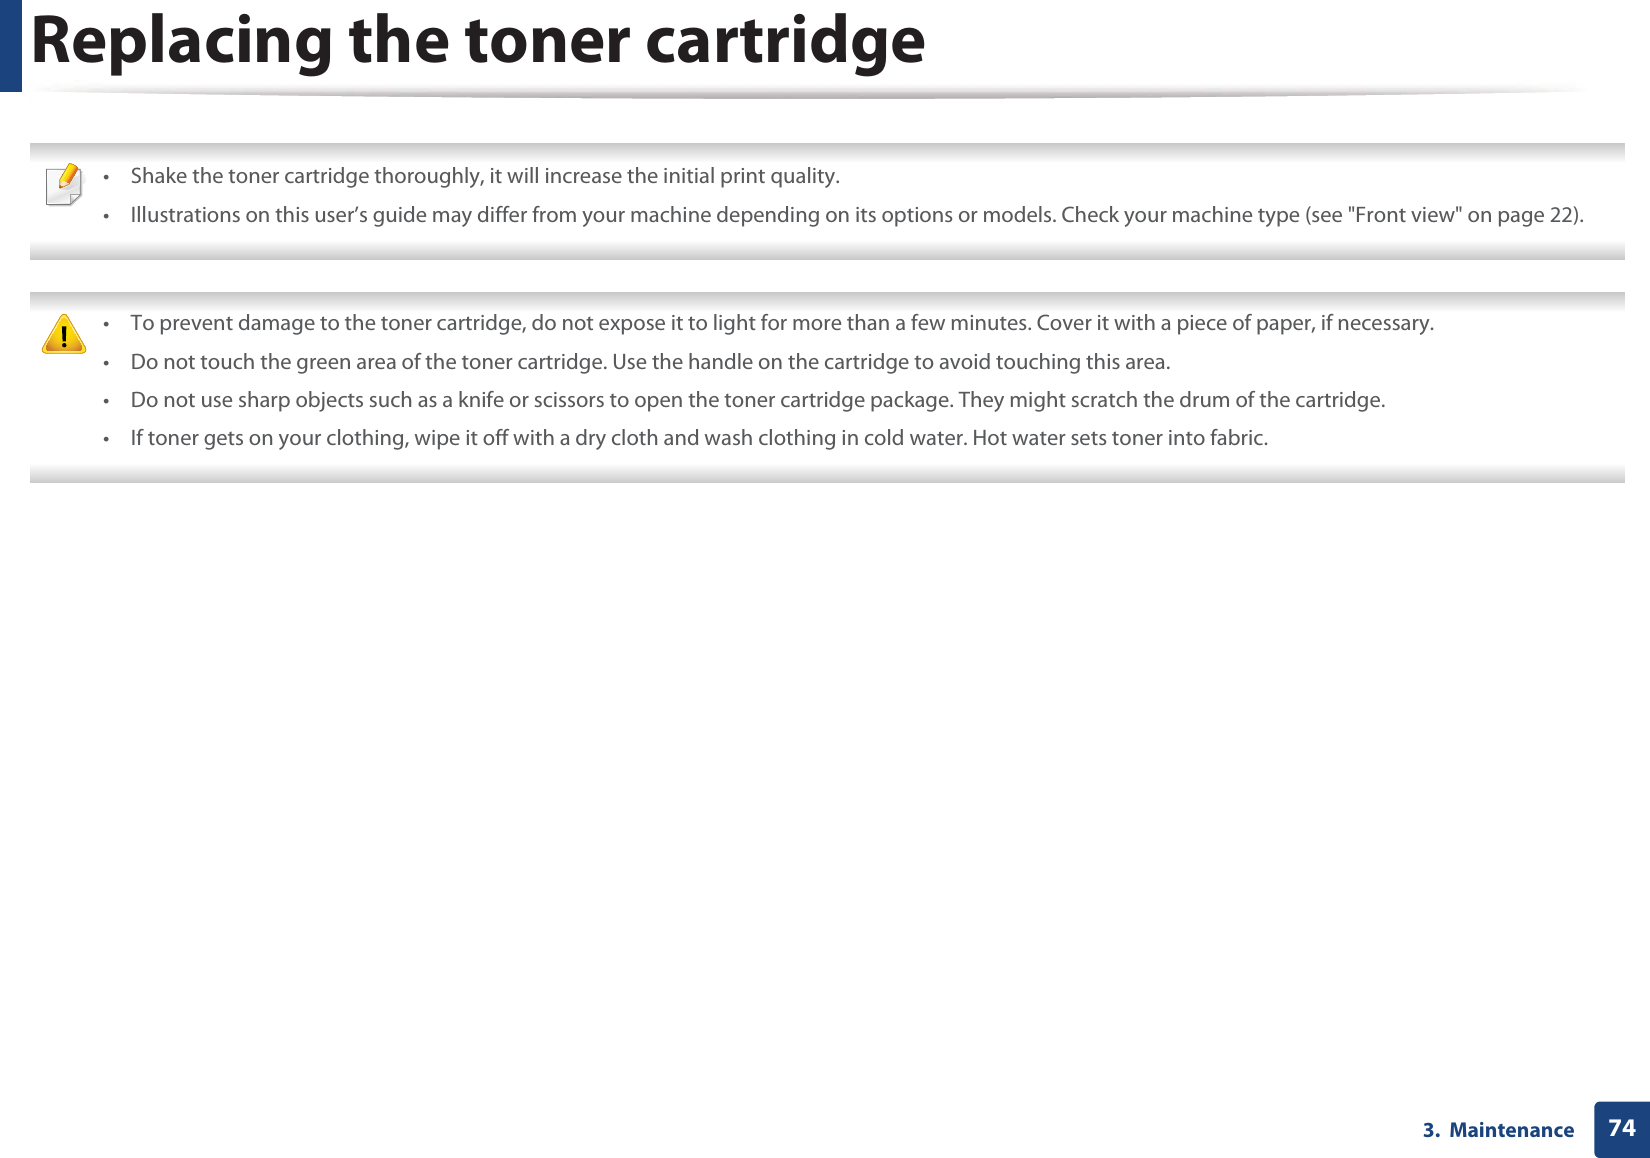 743.  MaintenanceReplacing the toner cartridge • Shake the toner cartridge thoroughly, it will increase the initial print quality.• Illustrations on this user’s guide may differ from your machine depending on its options or models. Check your machine type (see &quot;Front view&quot; on page 22).  • To prevent damage to the toner cartridge, do not expose it to light for more than a few minutes. Cover it with a piece of paper, if necessary. • Do not touch the green area of the toner cartridge. Use the handle on the cartridge to avoid touching this area. • Do not use sharp objects such as a knife or scissors to open the toner cartridge package. They might scratch the drum of the cartridge.• If toner gets on your clothing, wipe it off with a dry cloth and wash clothing in cold water. Hot water sets toner into fabric. 